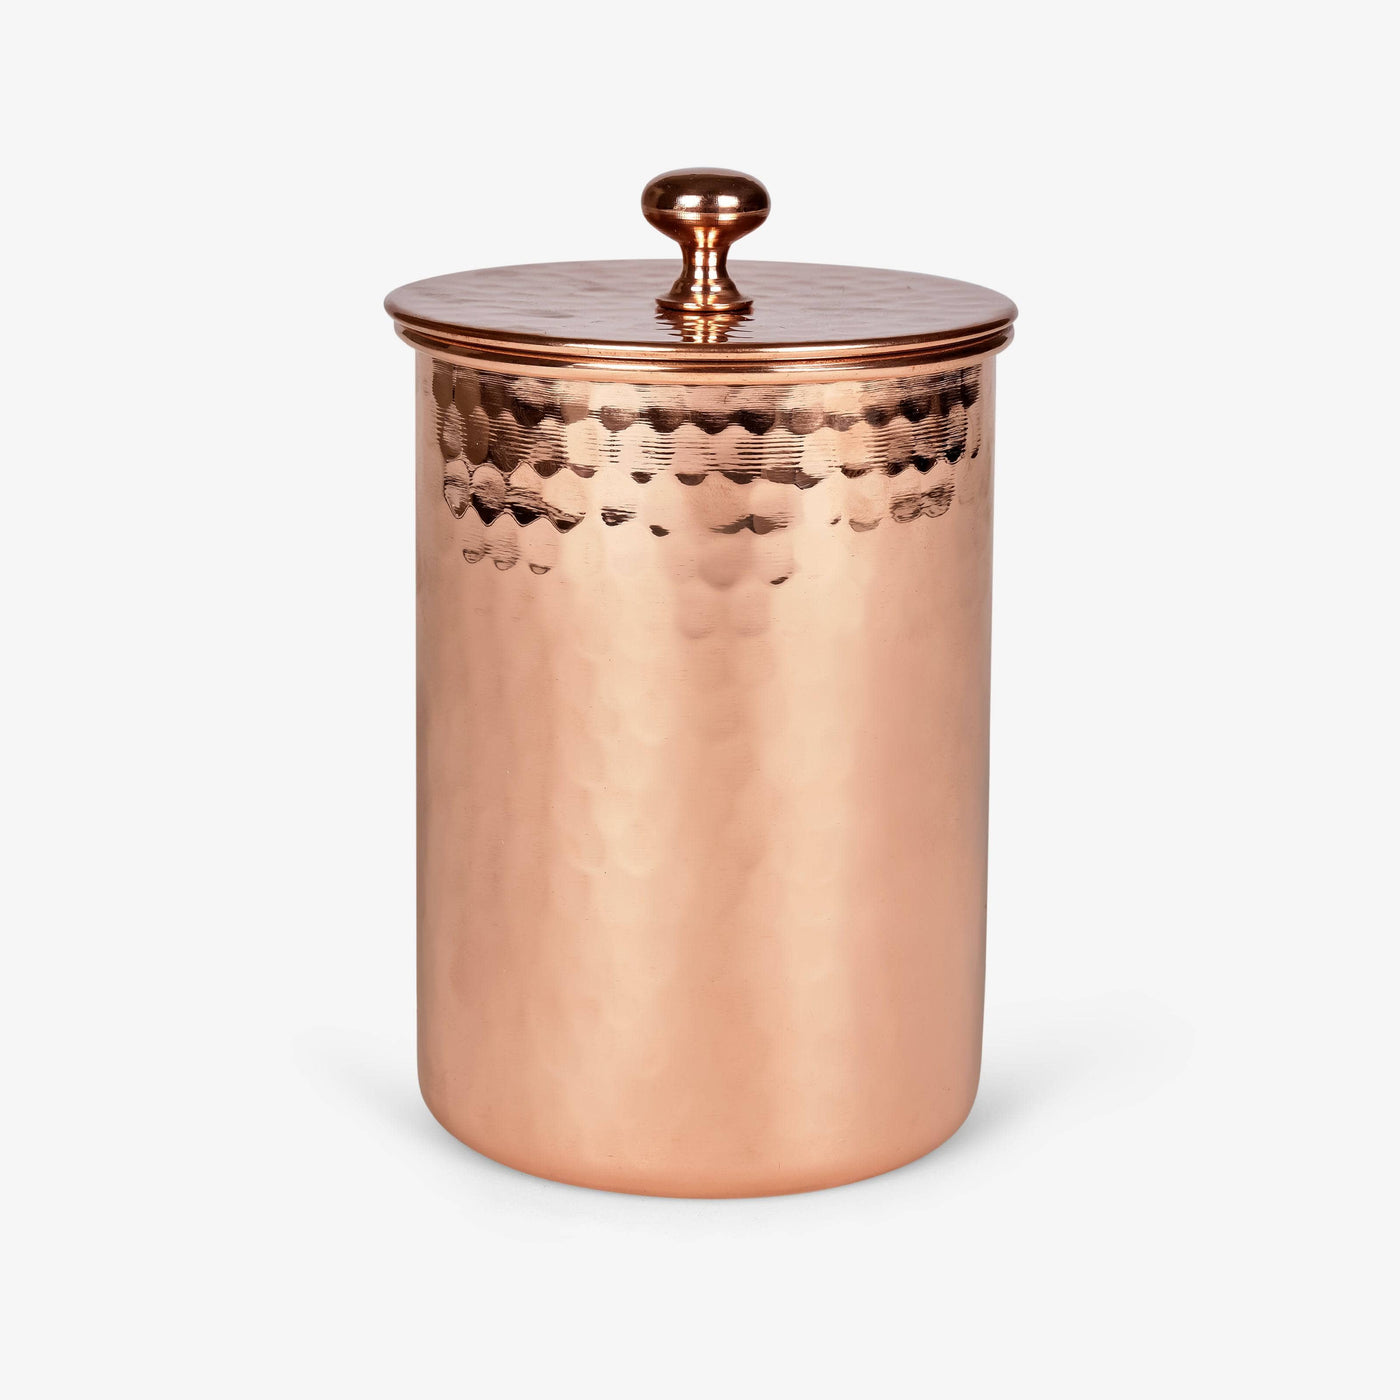 Penny Hammered Copper Spice Jar, Copper Kitchen Accessories sazy.com